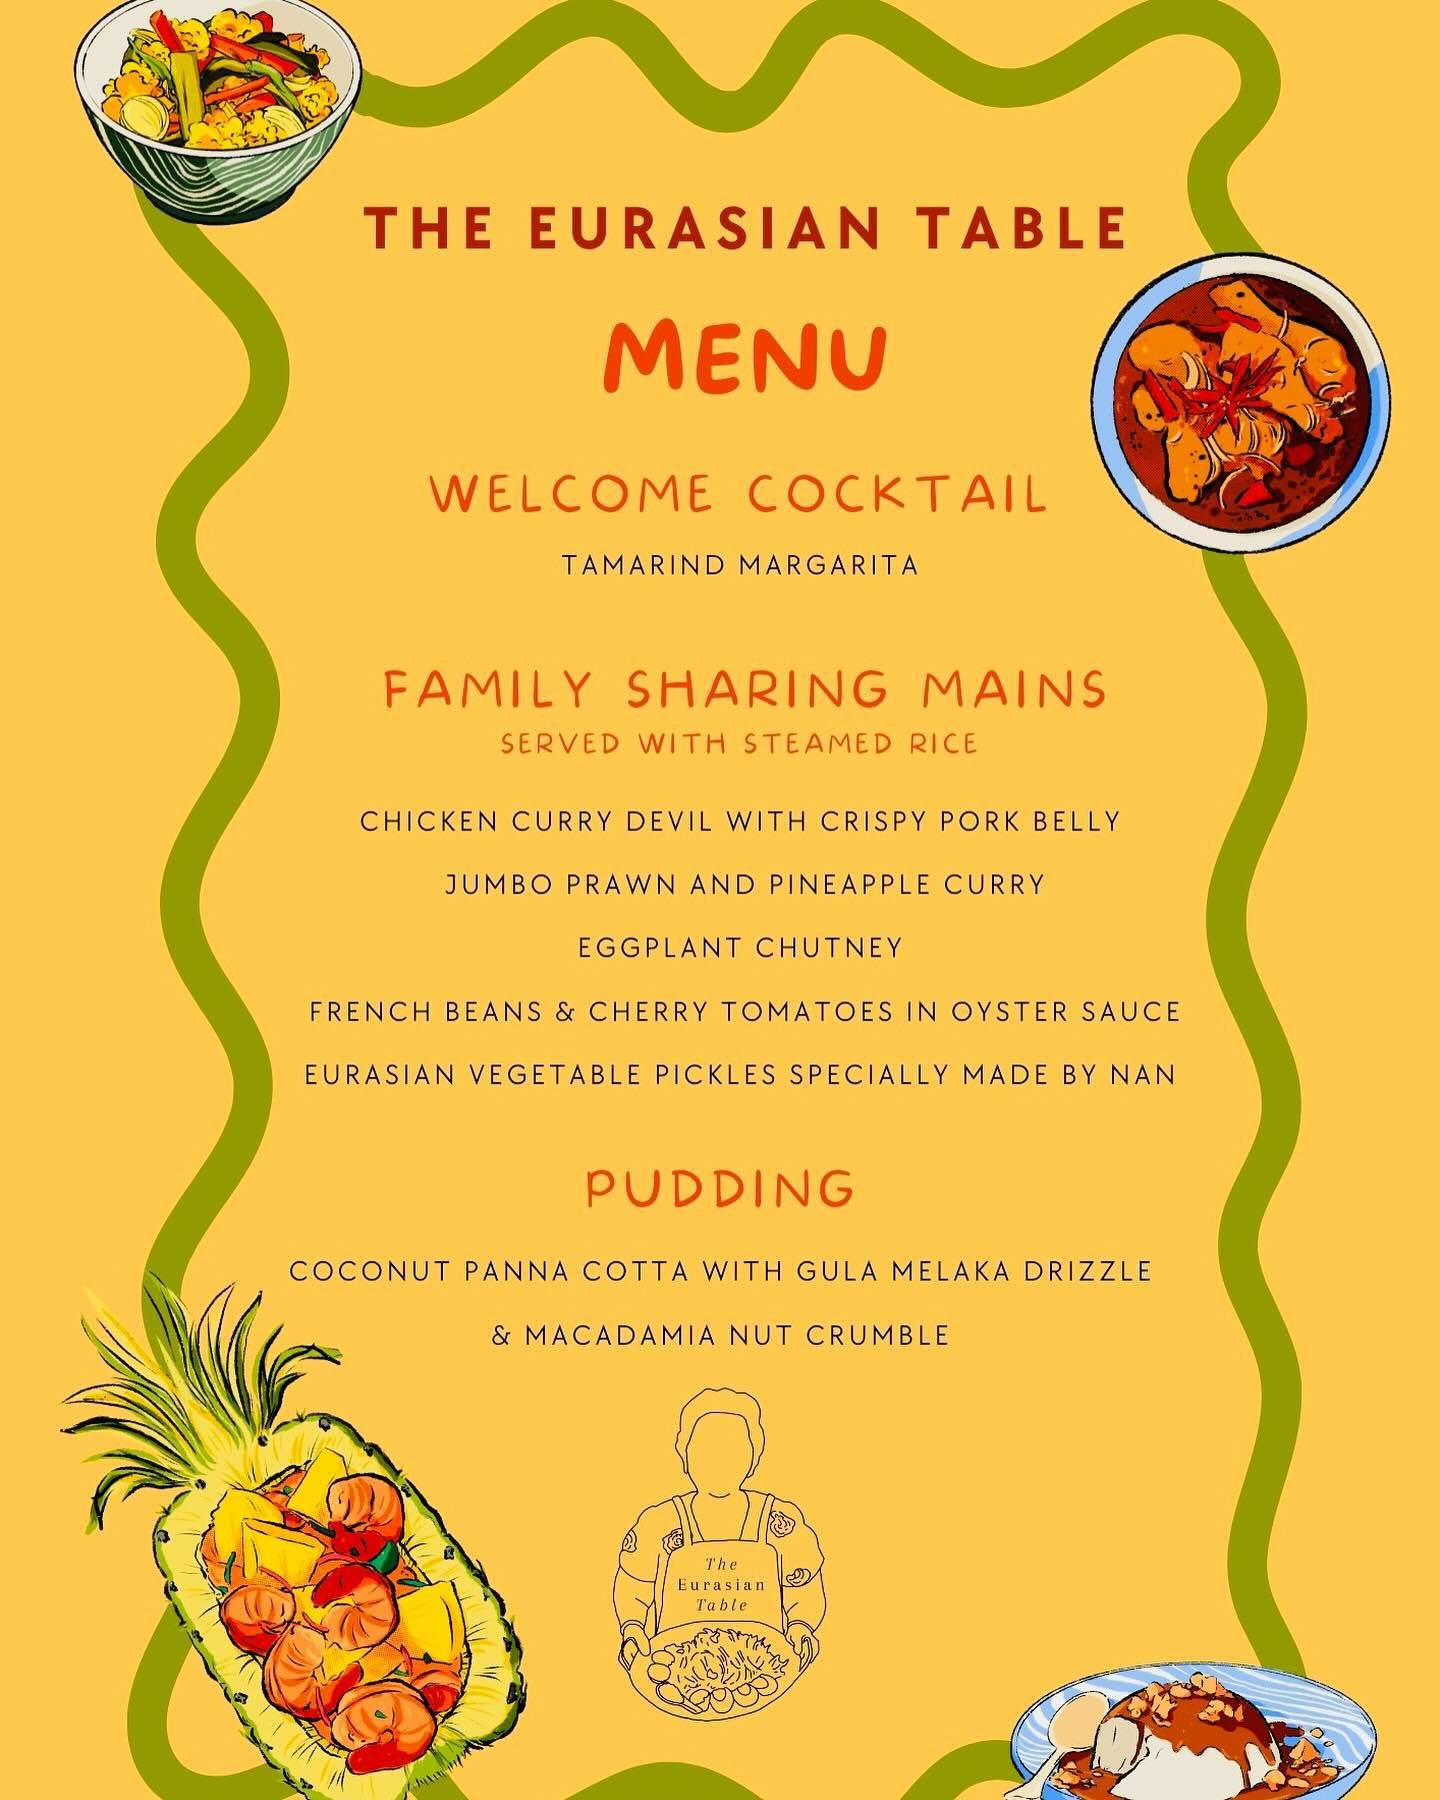 Experience an exclusive one-night only celebration of Eurasian flavors with @timrosswatson and myself, drawing inspiration from my 91-year-old Grandma&rsquo;s authentic Singaporean Eurasian recipes infused with modern twists. 

Join us for our Supper